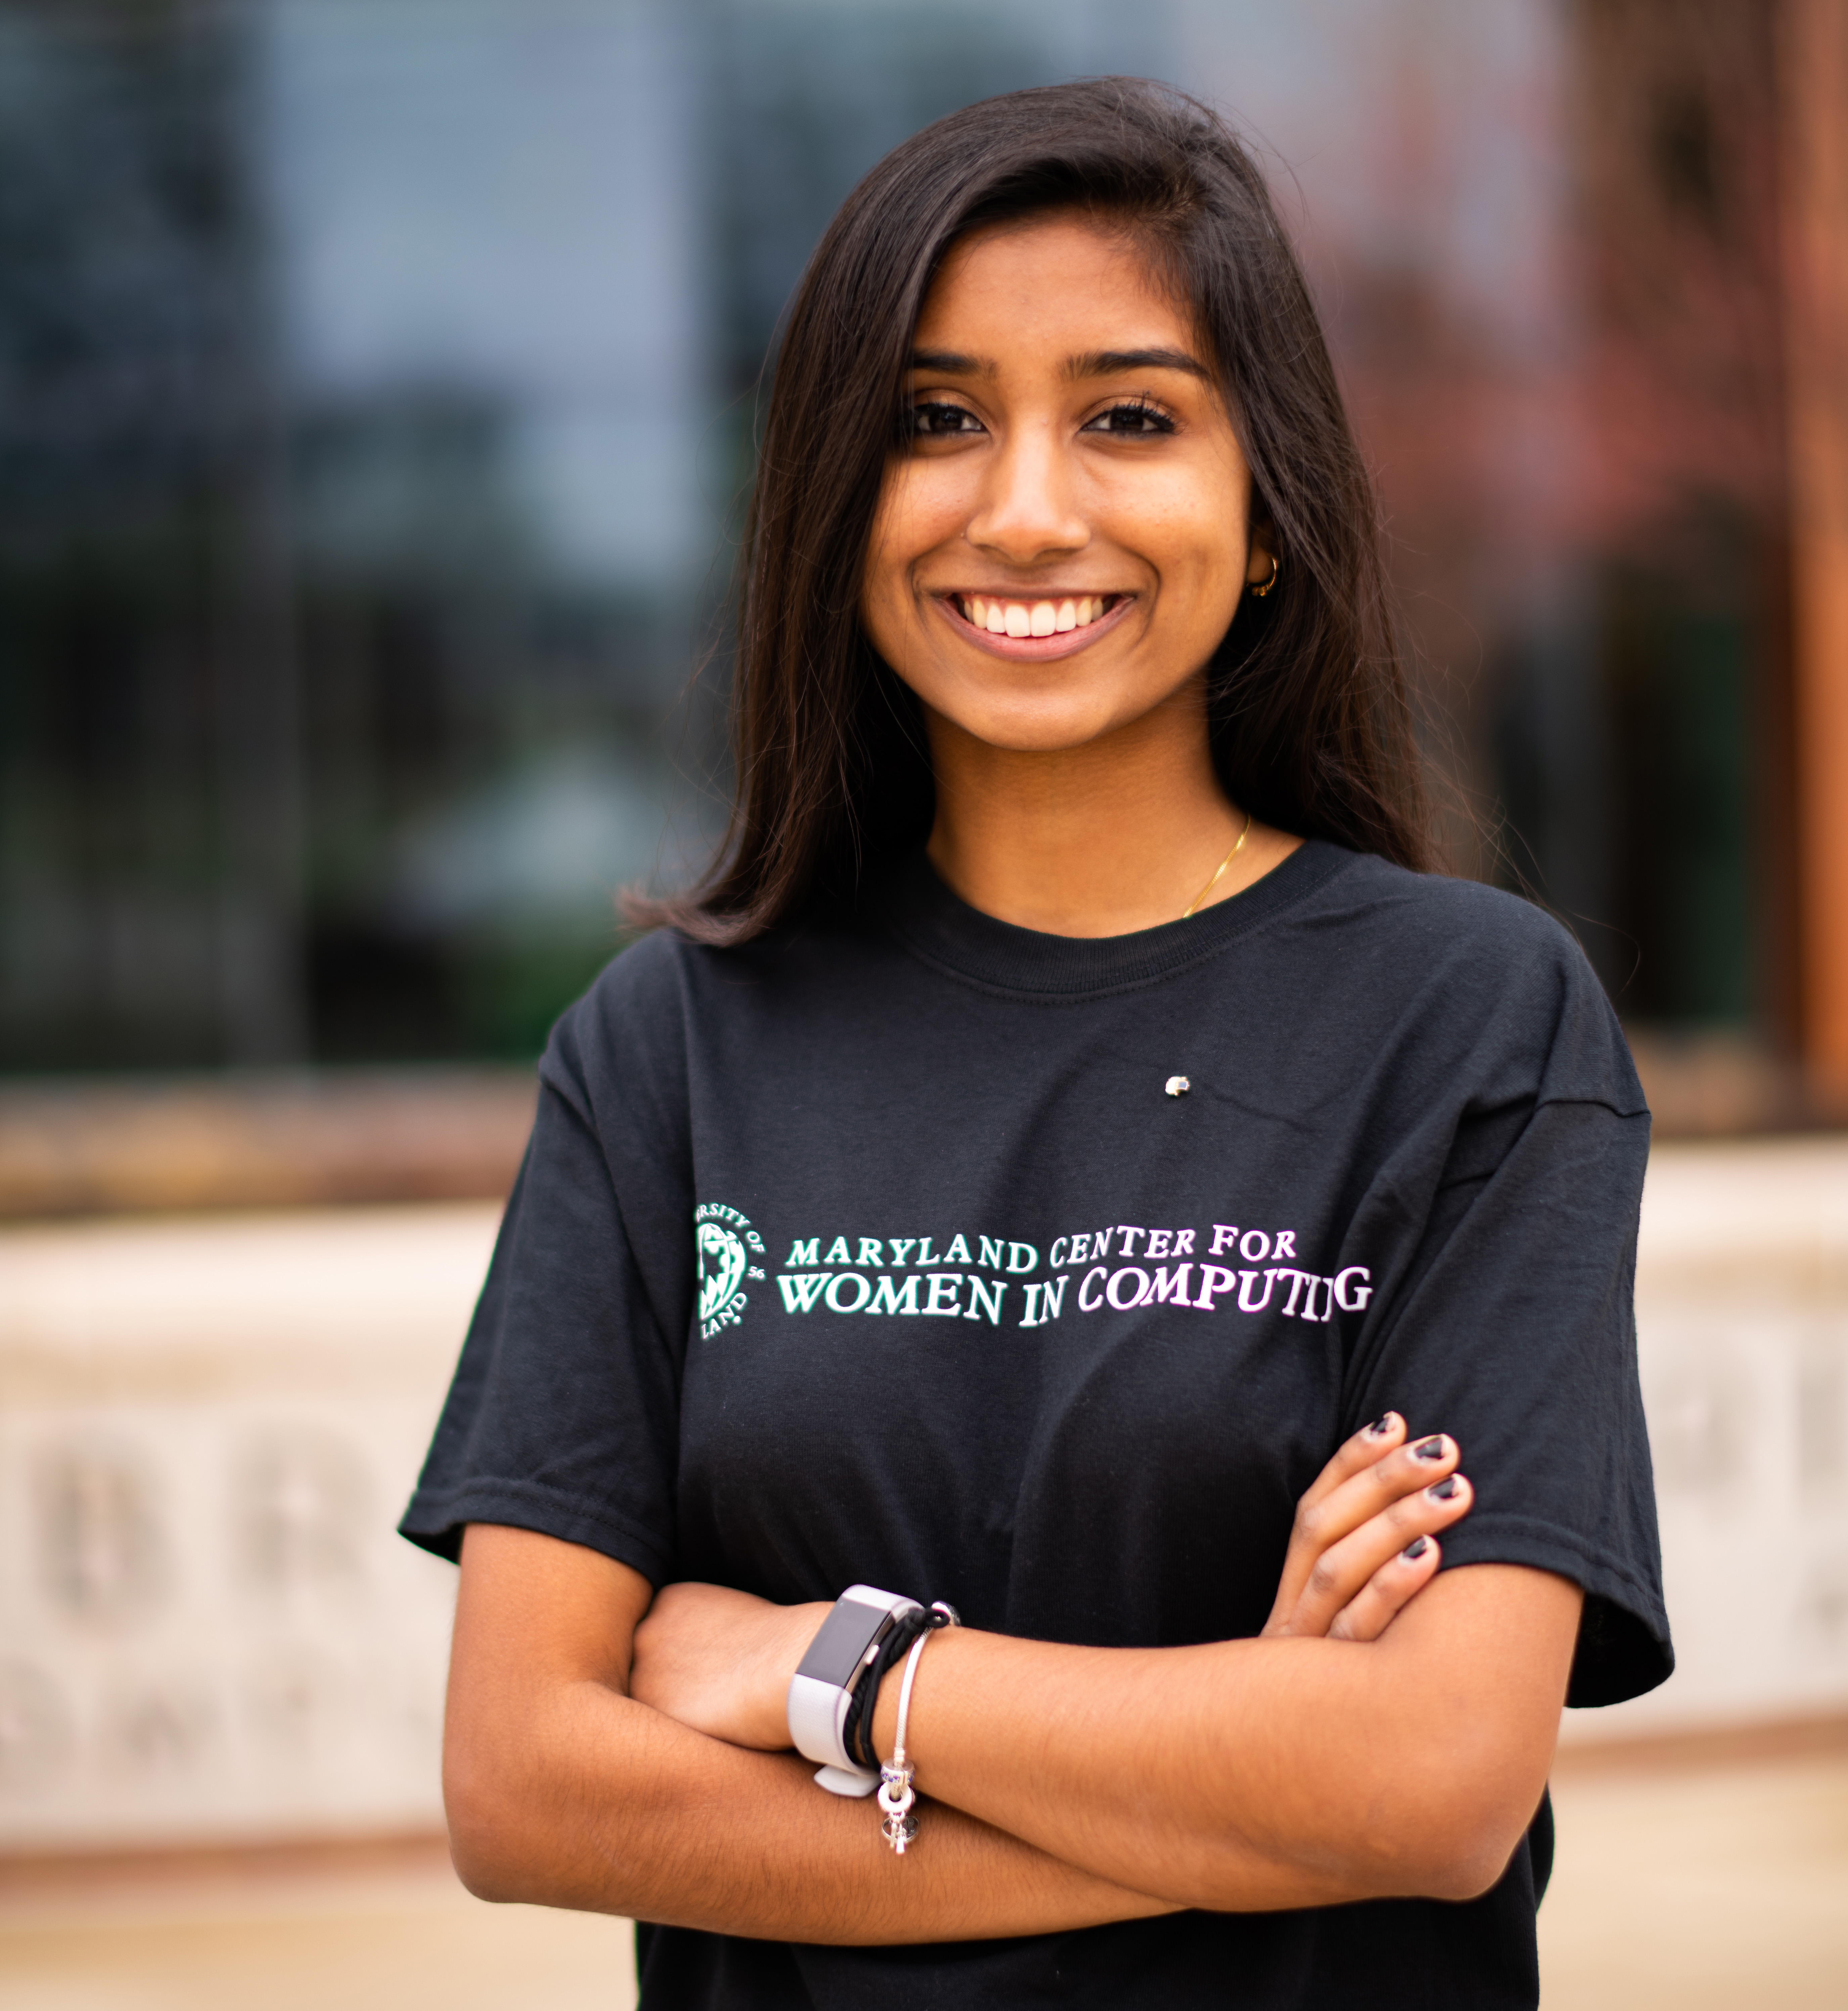 Freshman computer science major Utsa Santhosh, who got her start in computing as a CompSciConnect camper, is on the organizing committee for Bitcamp 2019. Image credit: Justin Derato (Click image to download hi-res version)